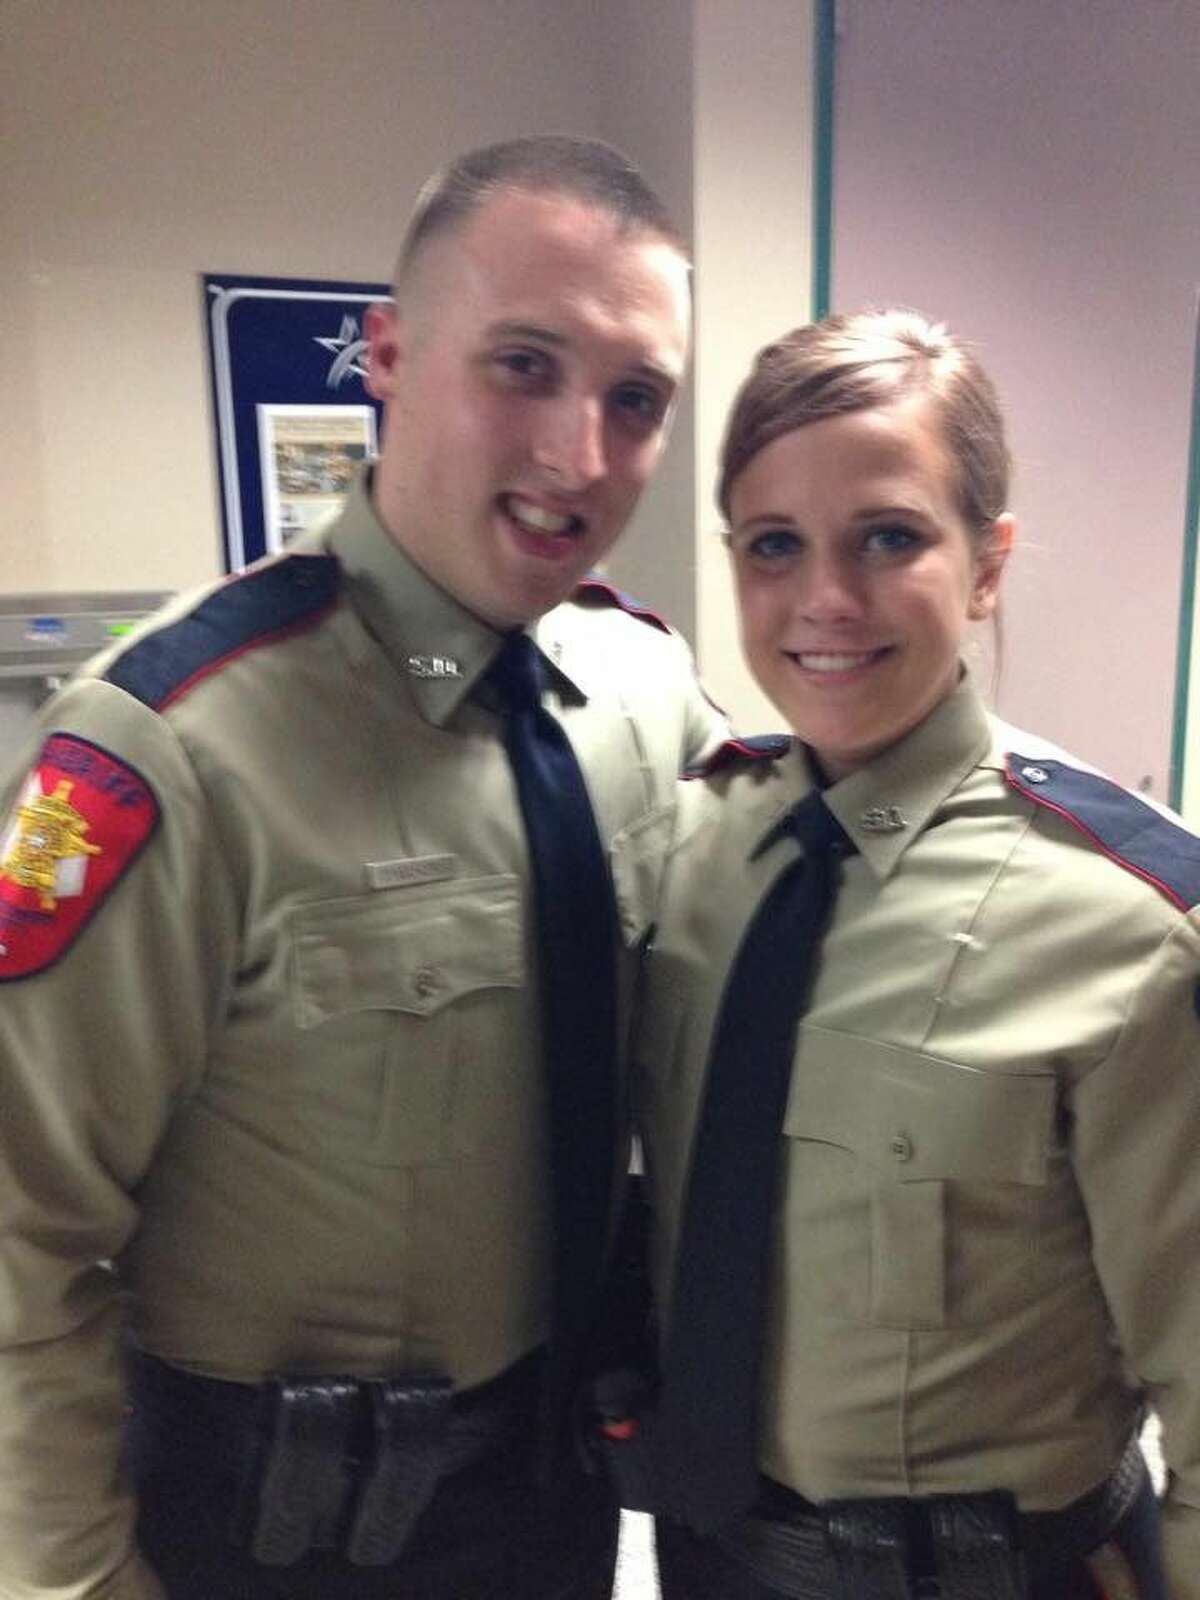 Catherine Breeding poses with fellow police academy graduate last fall. Breeding, 21, was killed Thursday, Jan. 29, 2015, in motorcycle crash in Conroe.